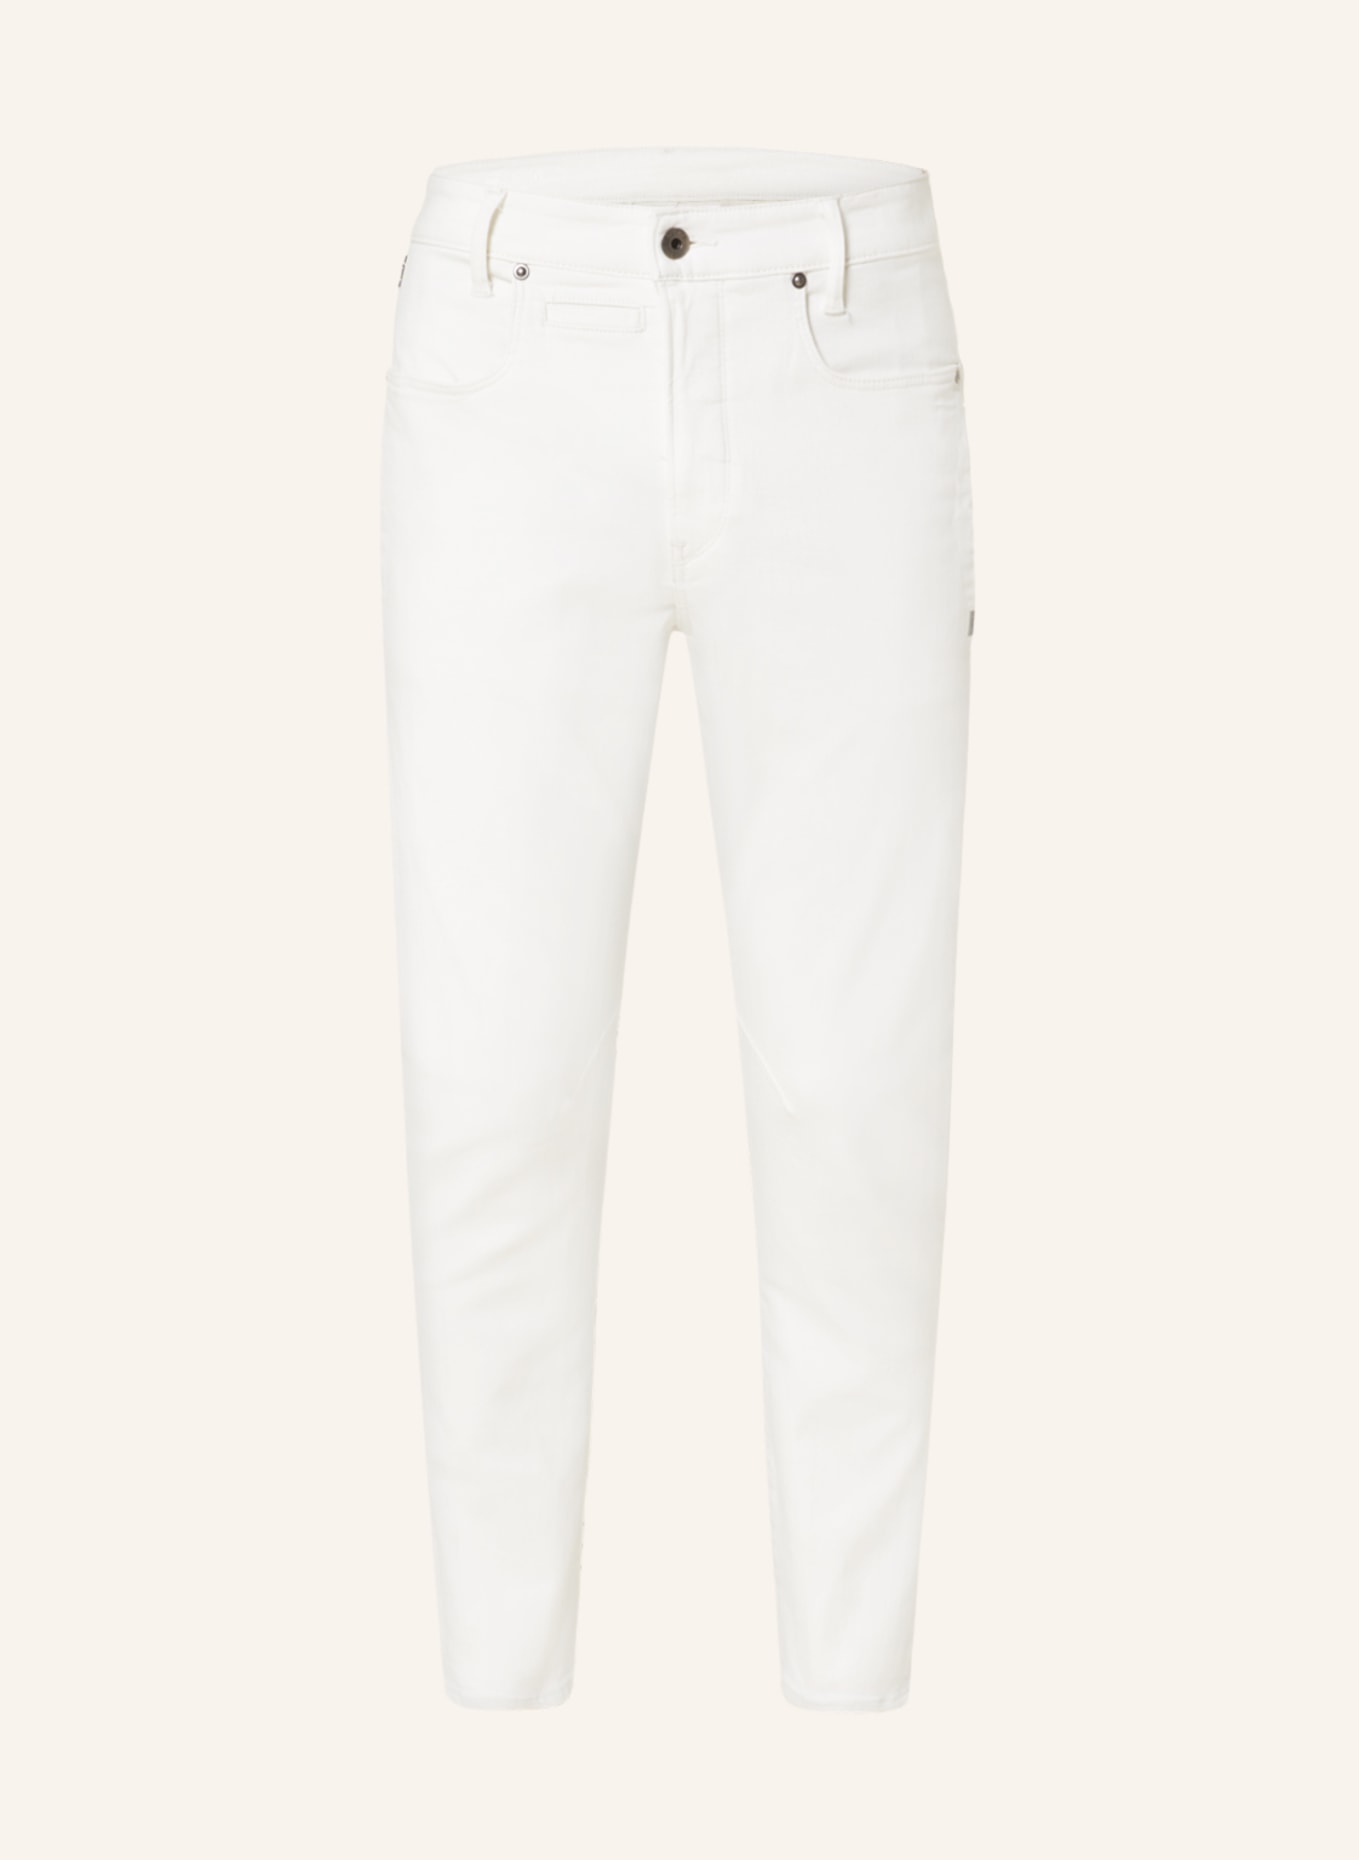 G-Star RAW Jeans D-STAQ 3D slim fit, Color: G006 white gd (Image 1)